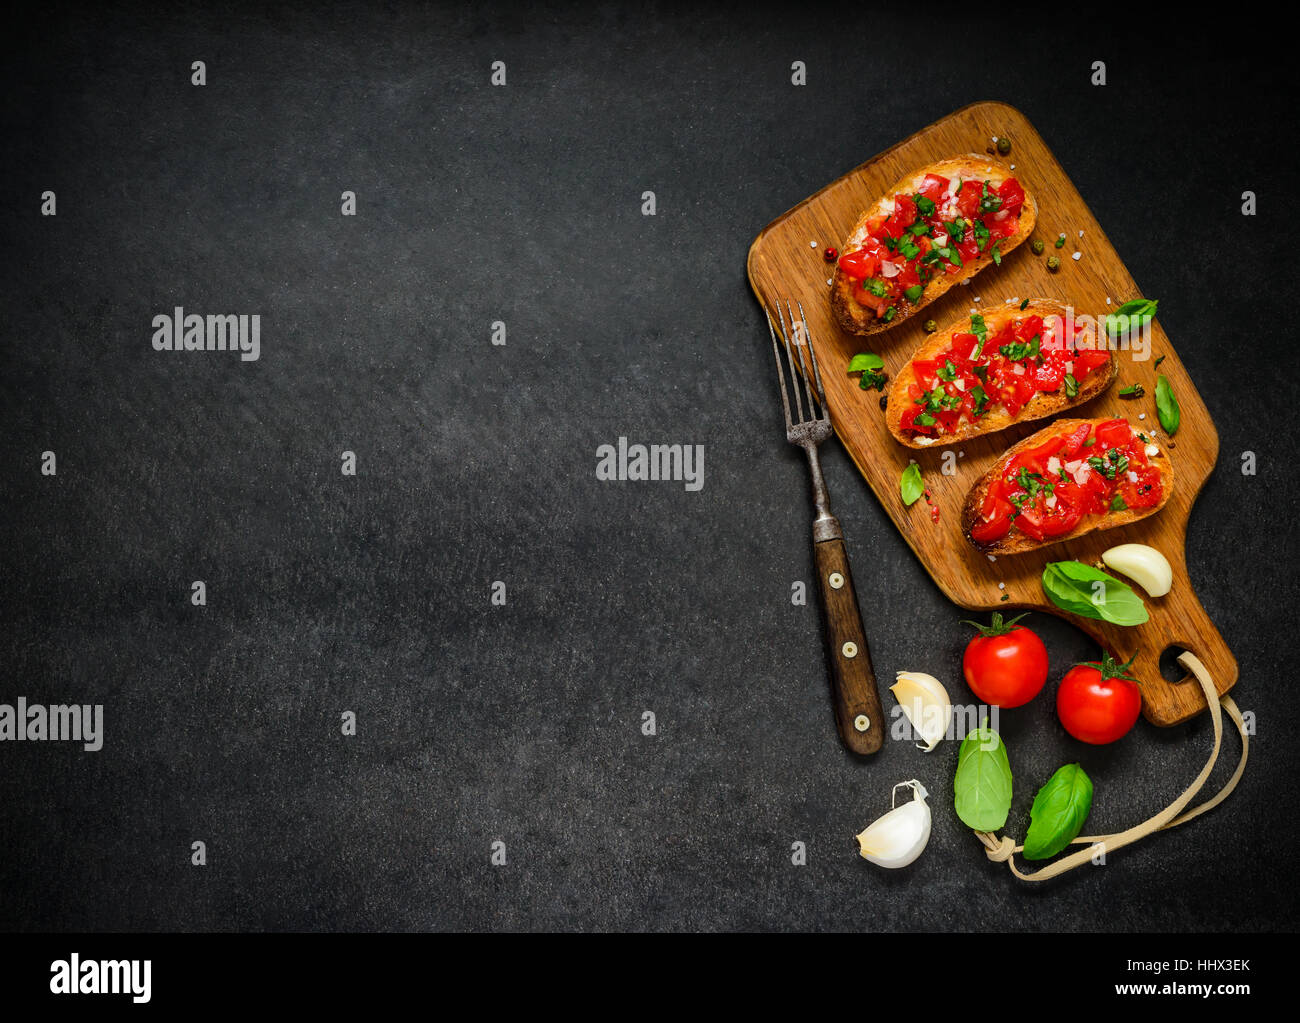 Italian Cuisine Food with Bruschetta Antipasto with Tomato and Basil on Copy Space Text Area Stock Photo